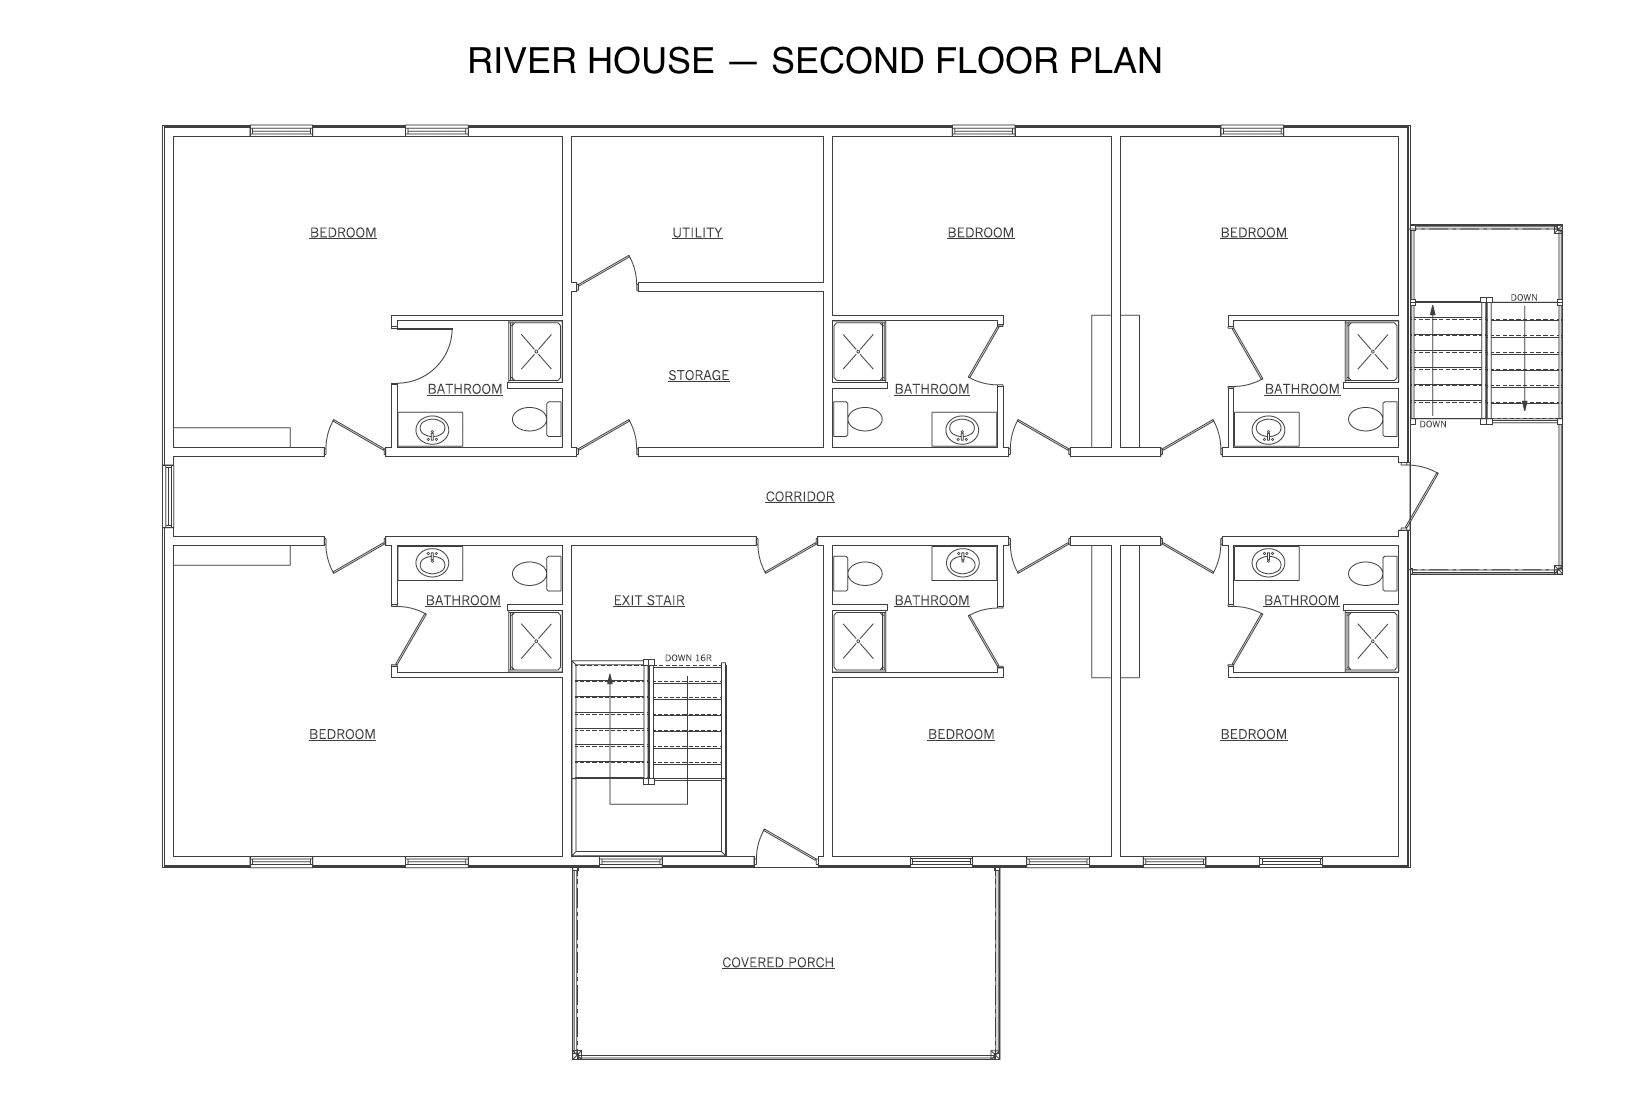 floor plans for the second floor of the River House